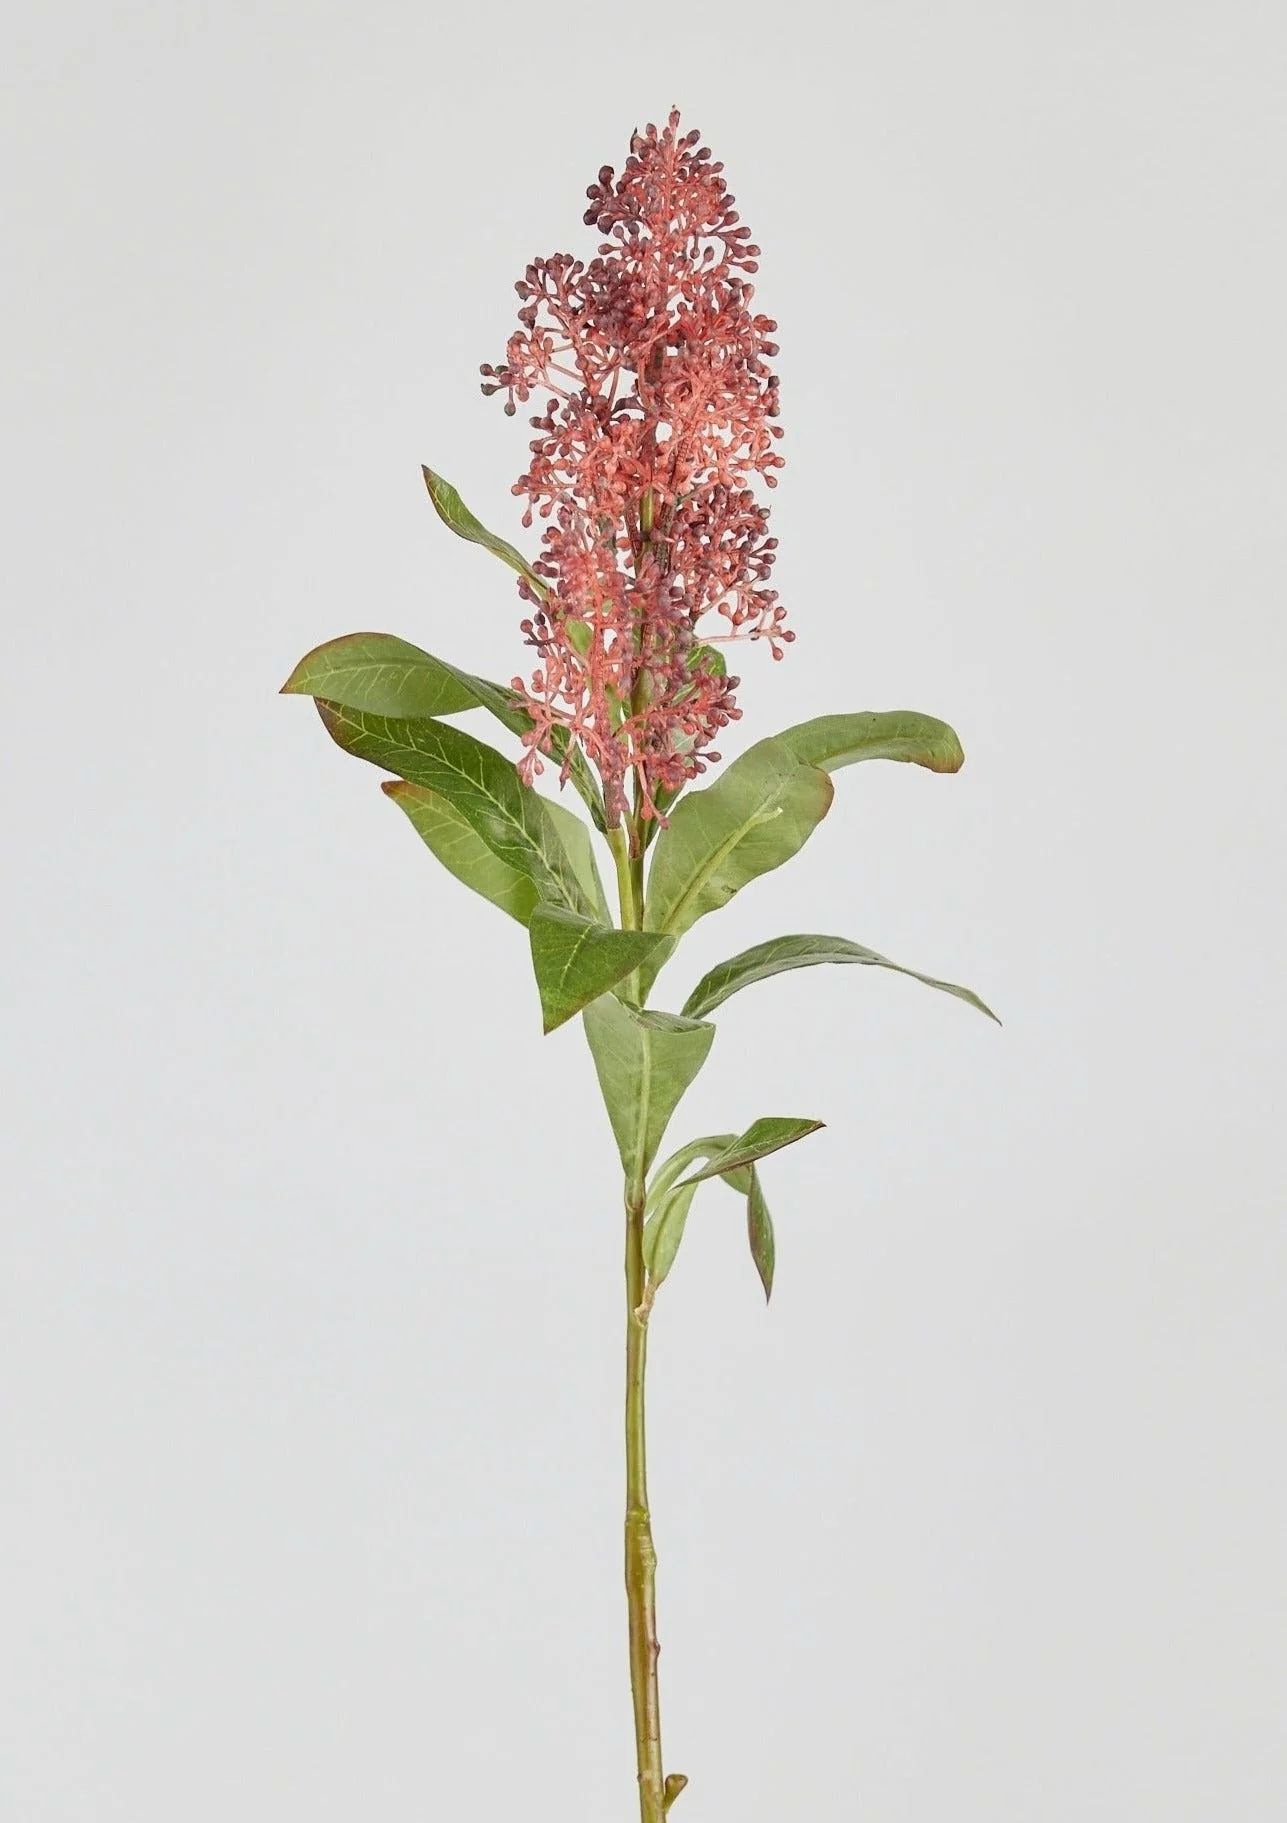 Rust Burgundy Skimmia Stem | Elevated Artificial Flowers | Afloral.com | Afloral